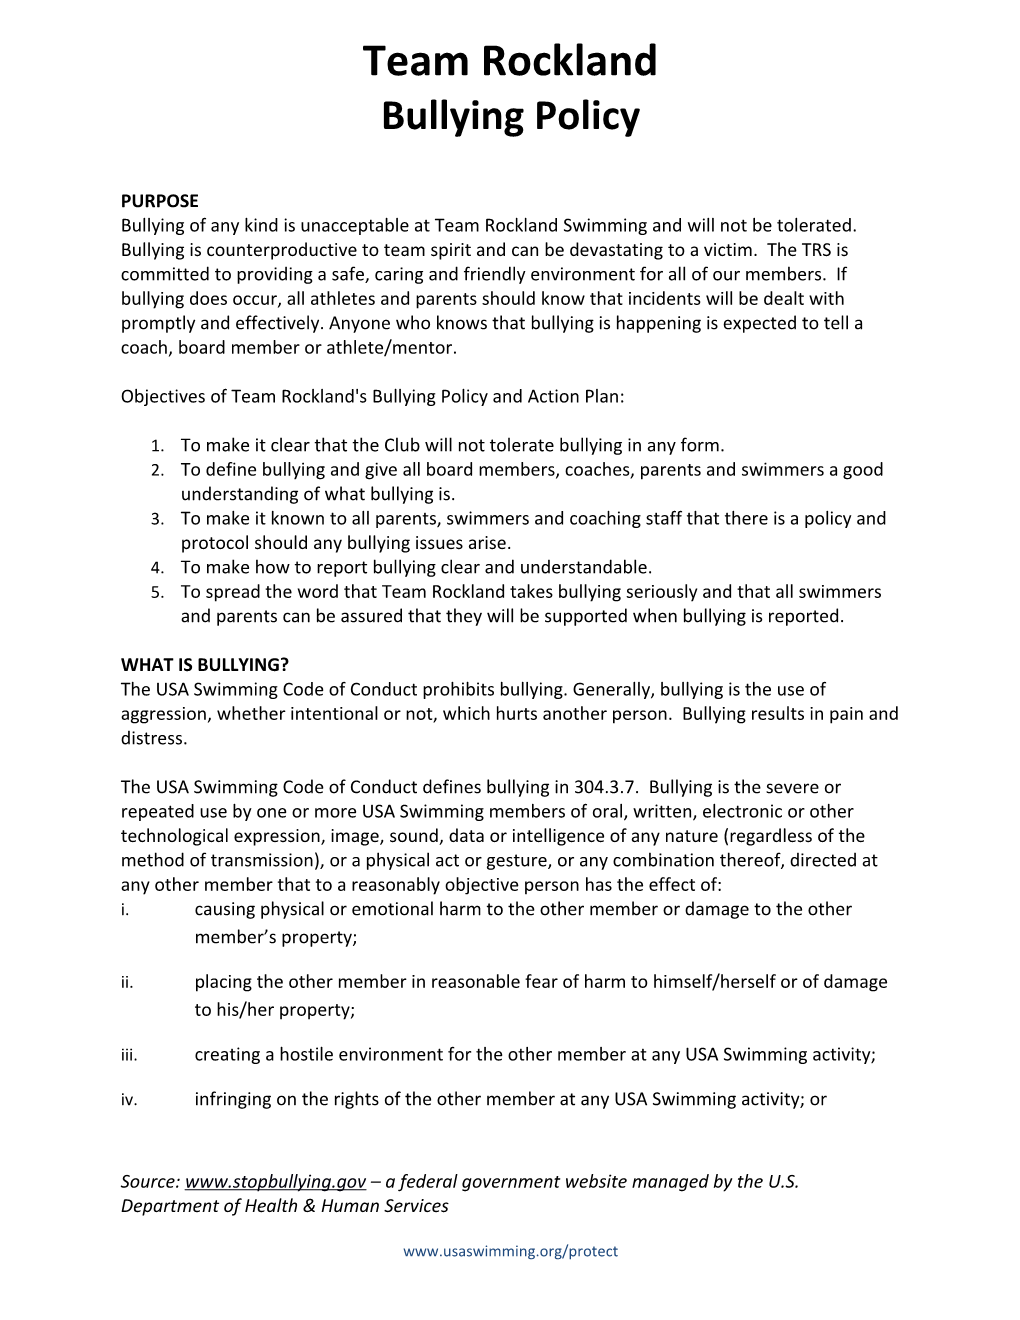 Objectives of Team Rockland's Bullying Policy and Action Plan